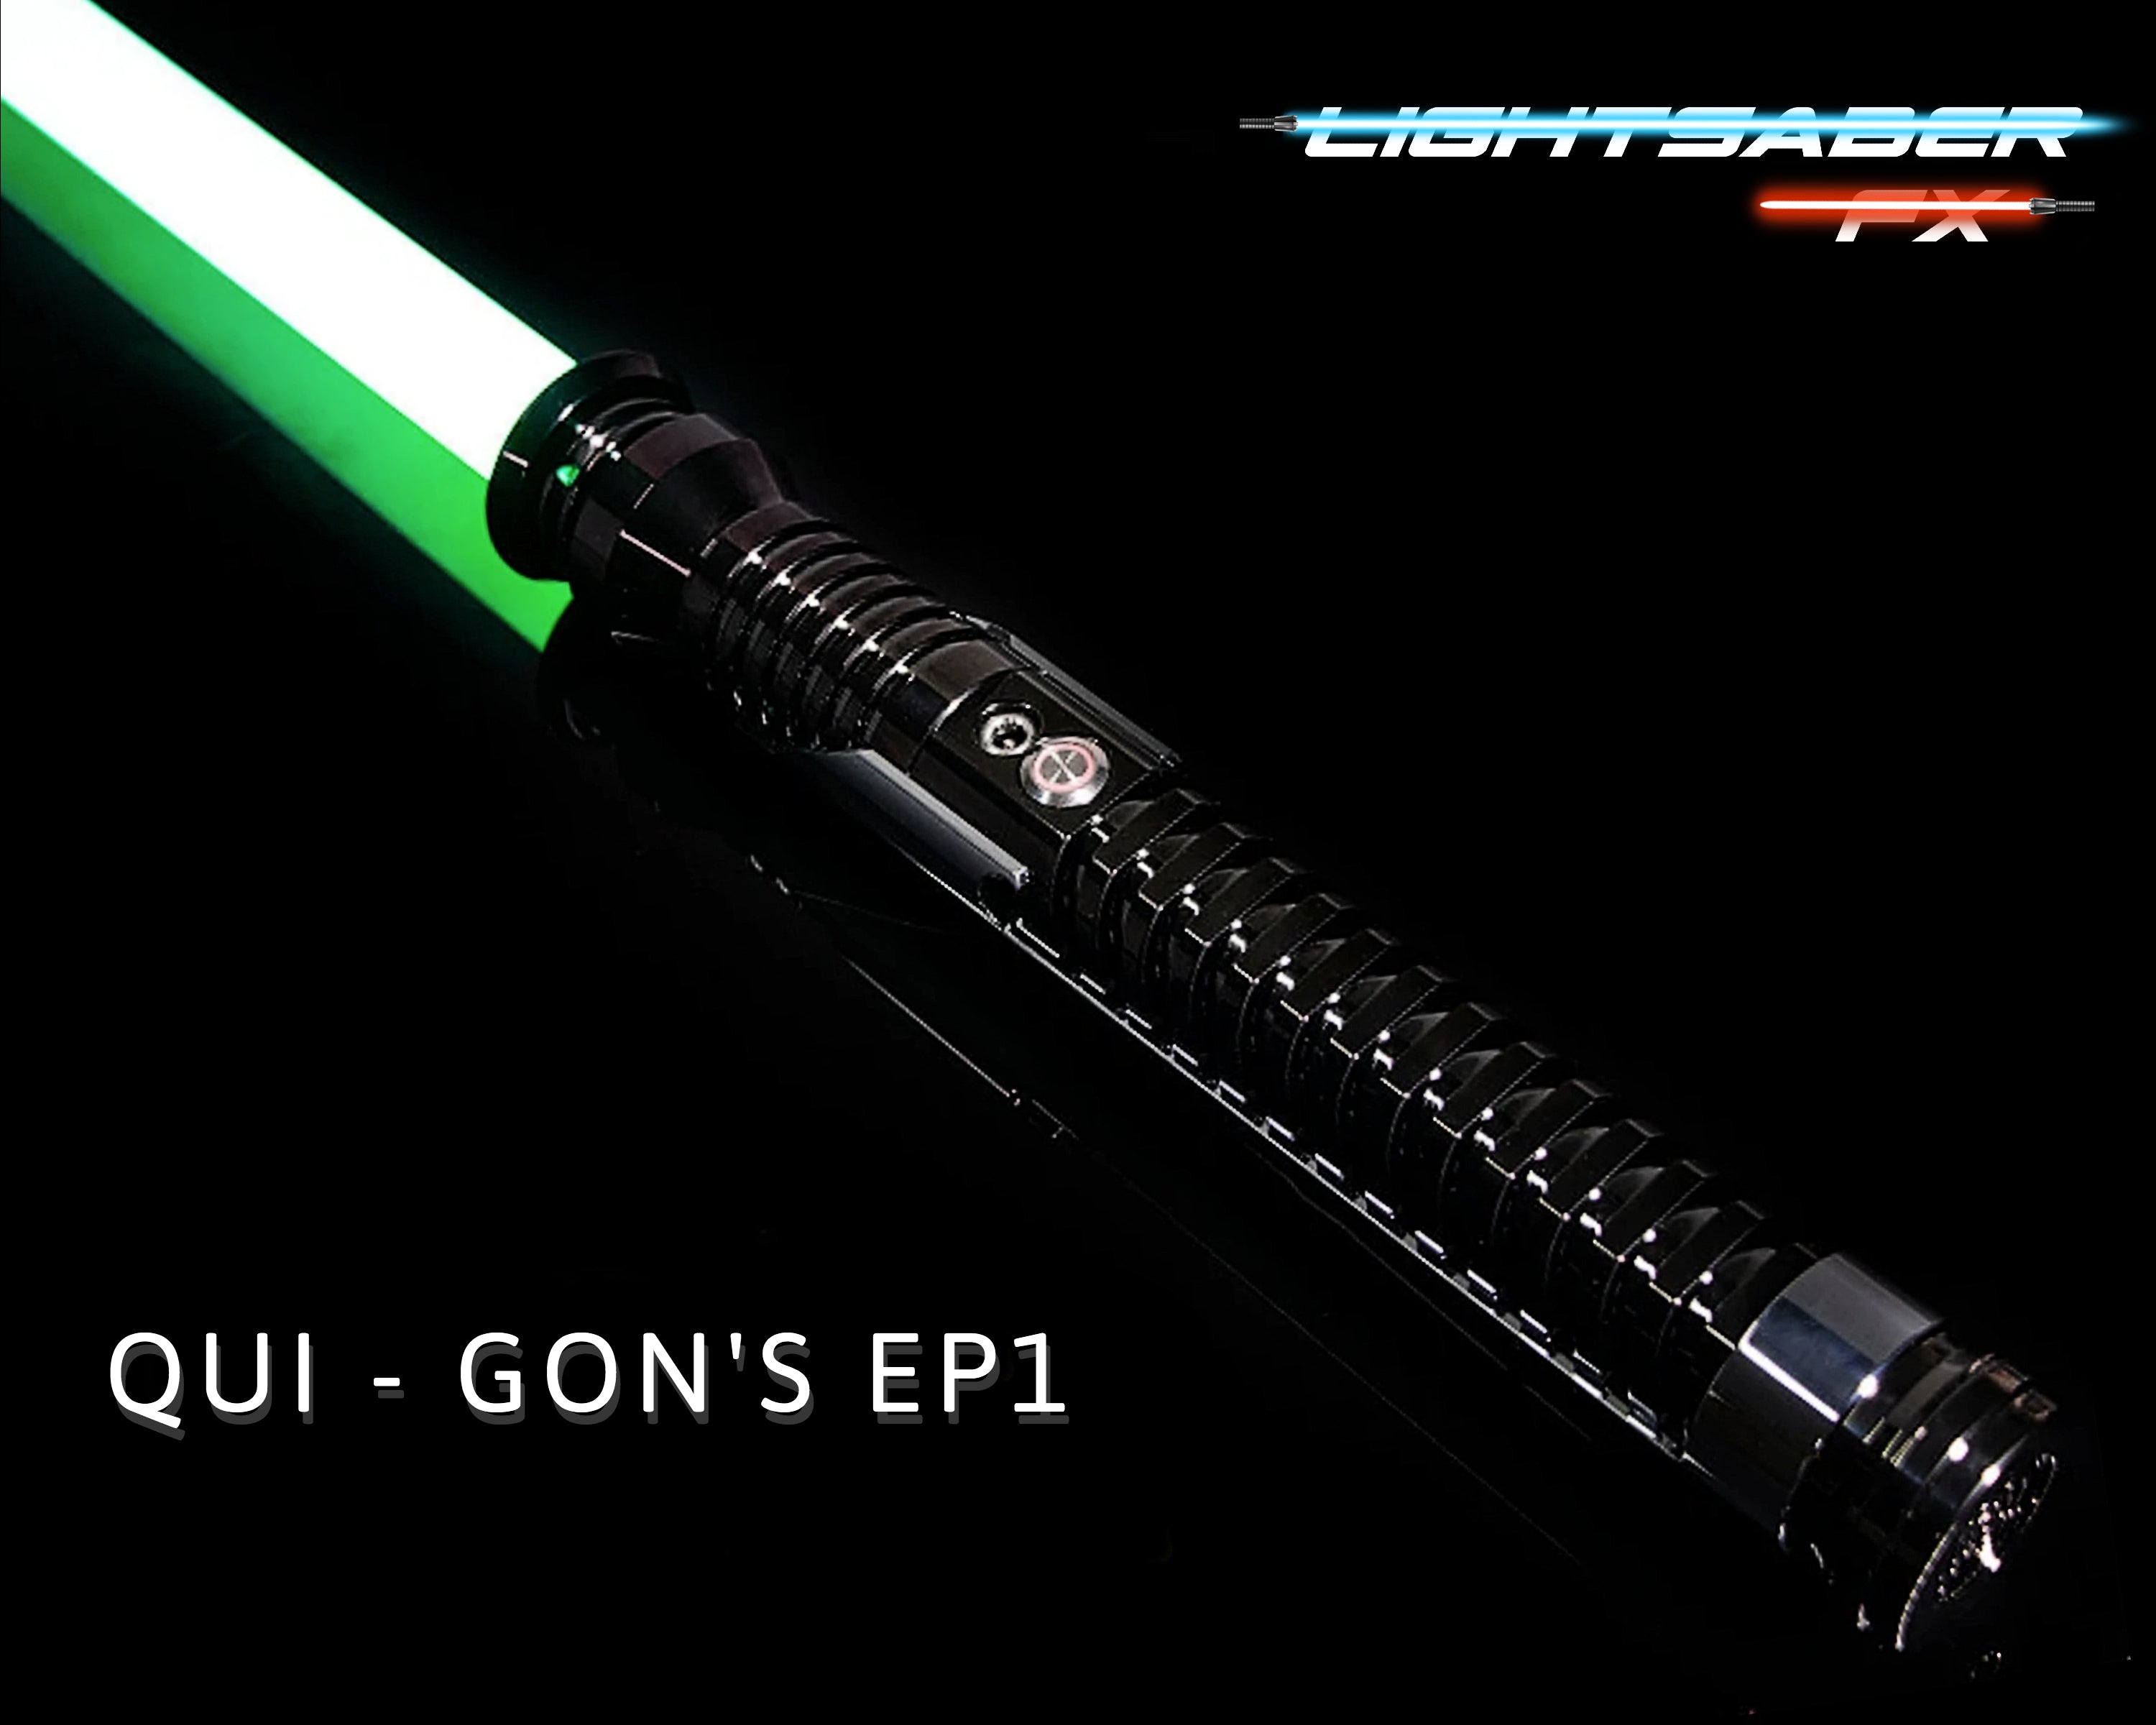 Someone want to tell me why this Qui-Gon Jinn lightsaber is red? :  r/StarWars